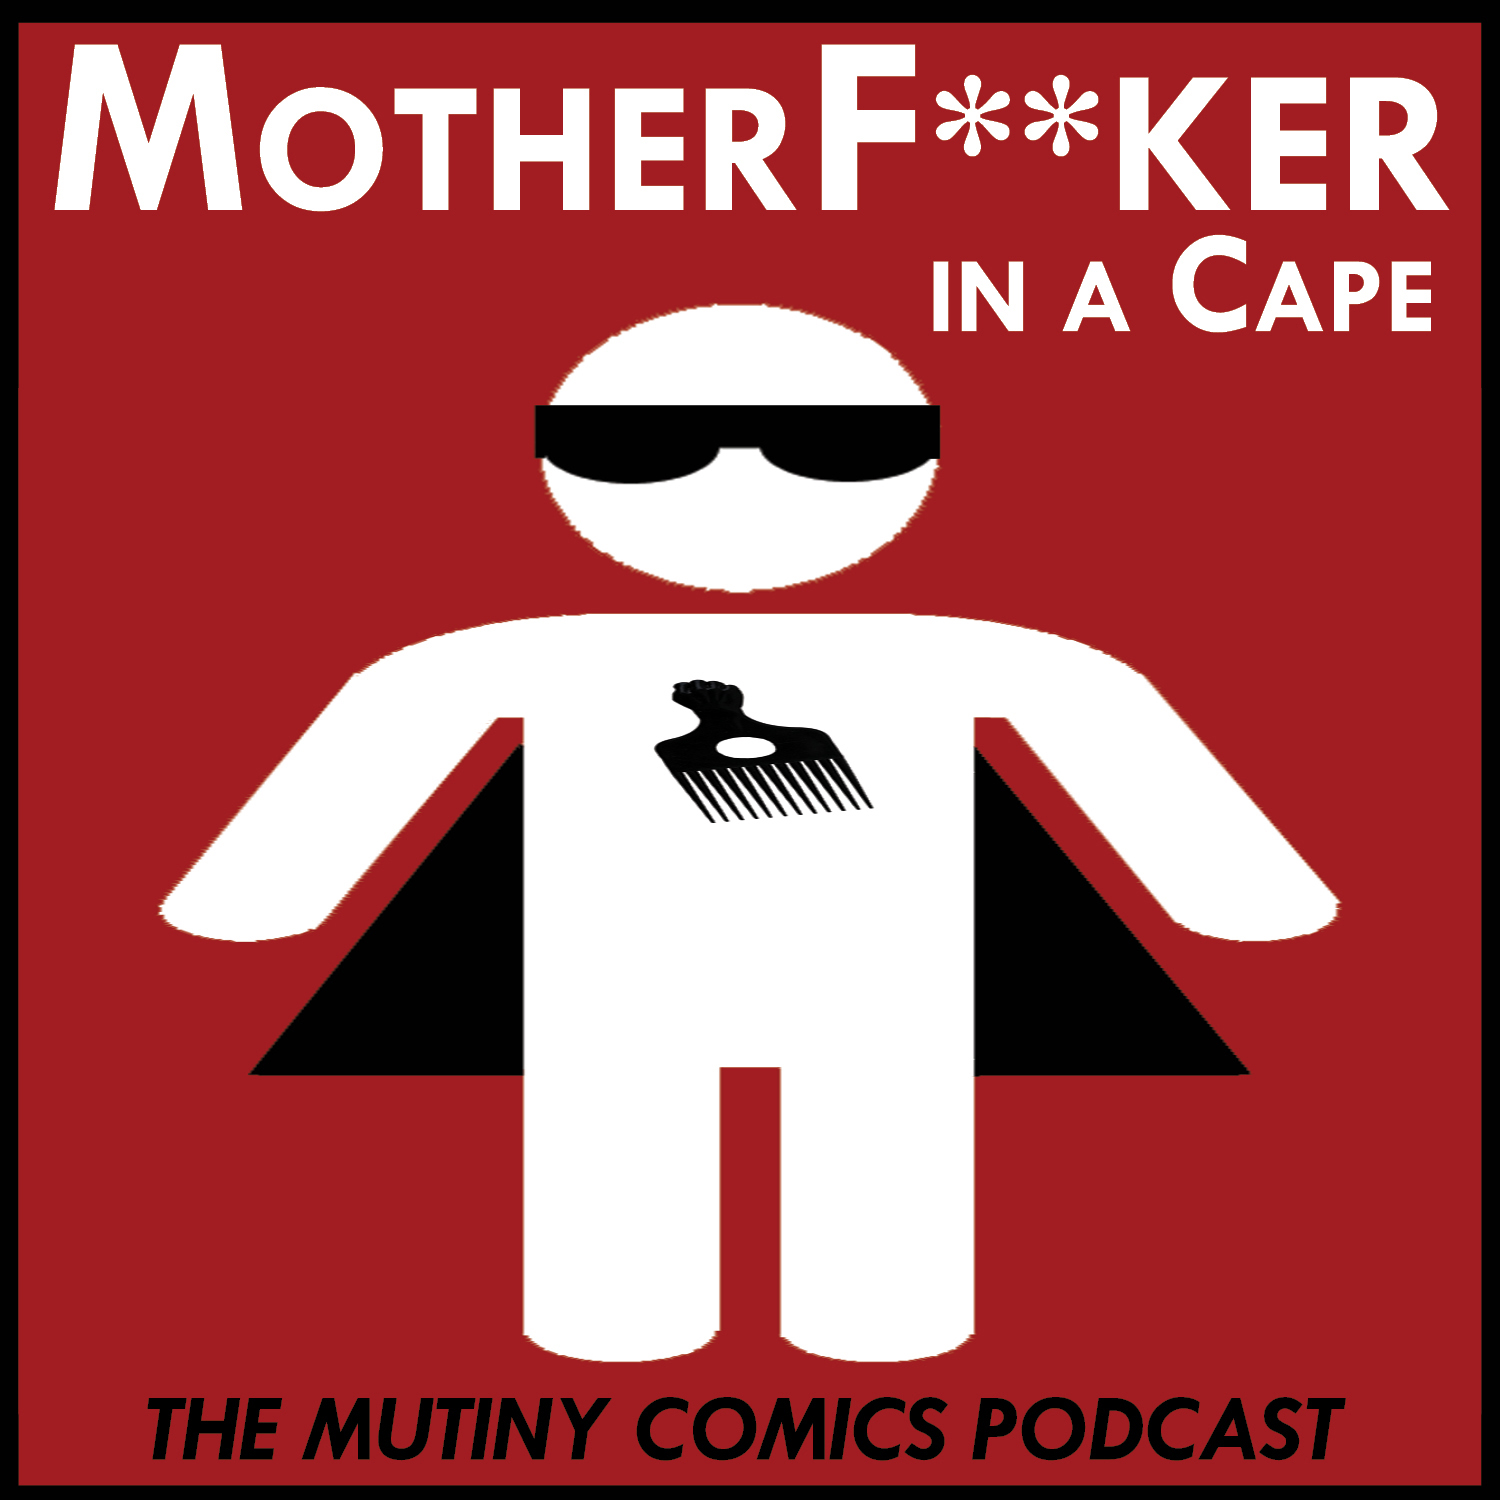 Image for the podcast Mother F**ker in a Cape 